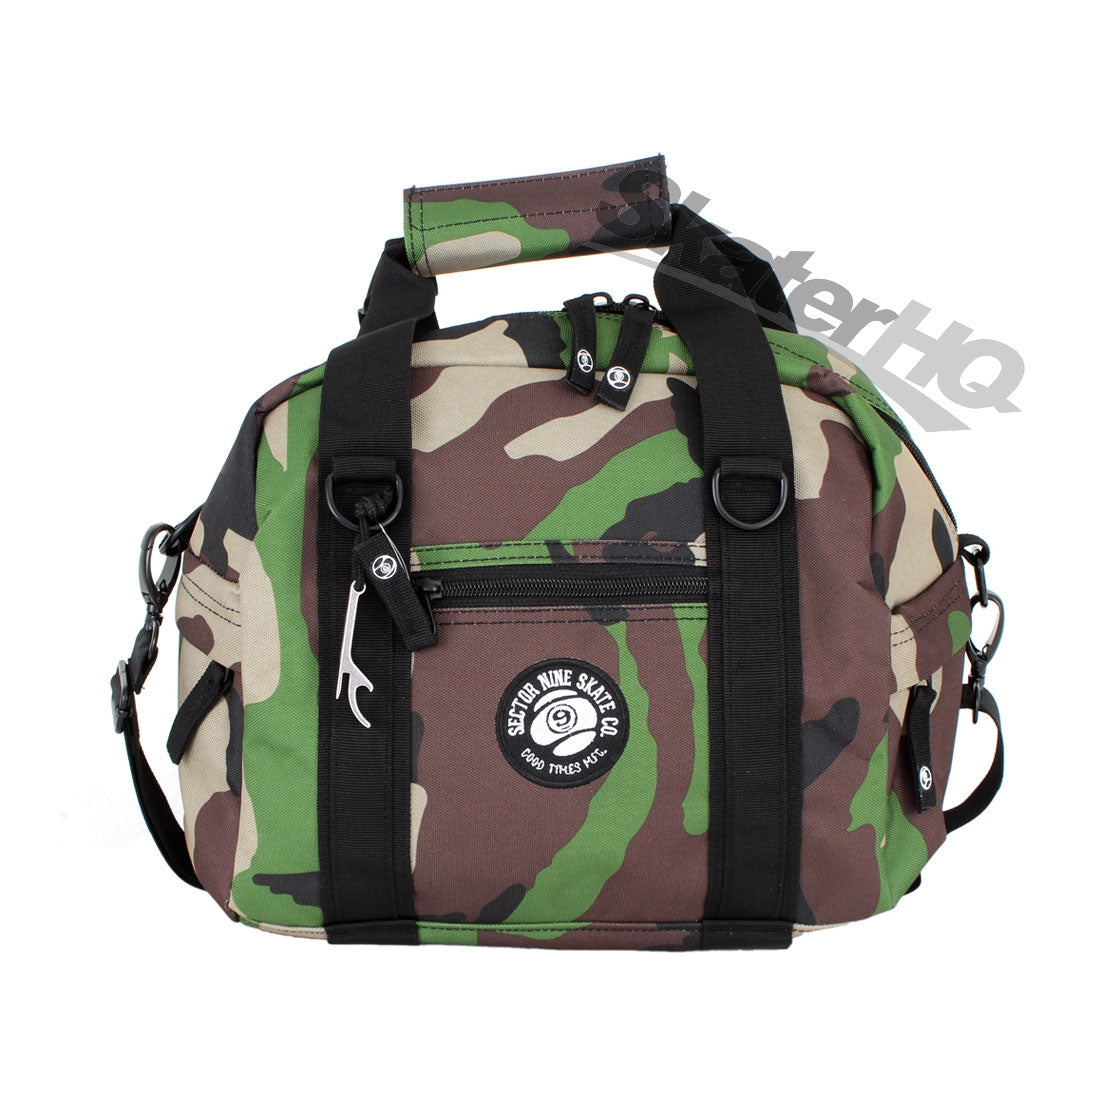 Sector 9 Field Cooler Bag - Camo Bags and Backpacks